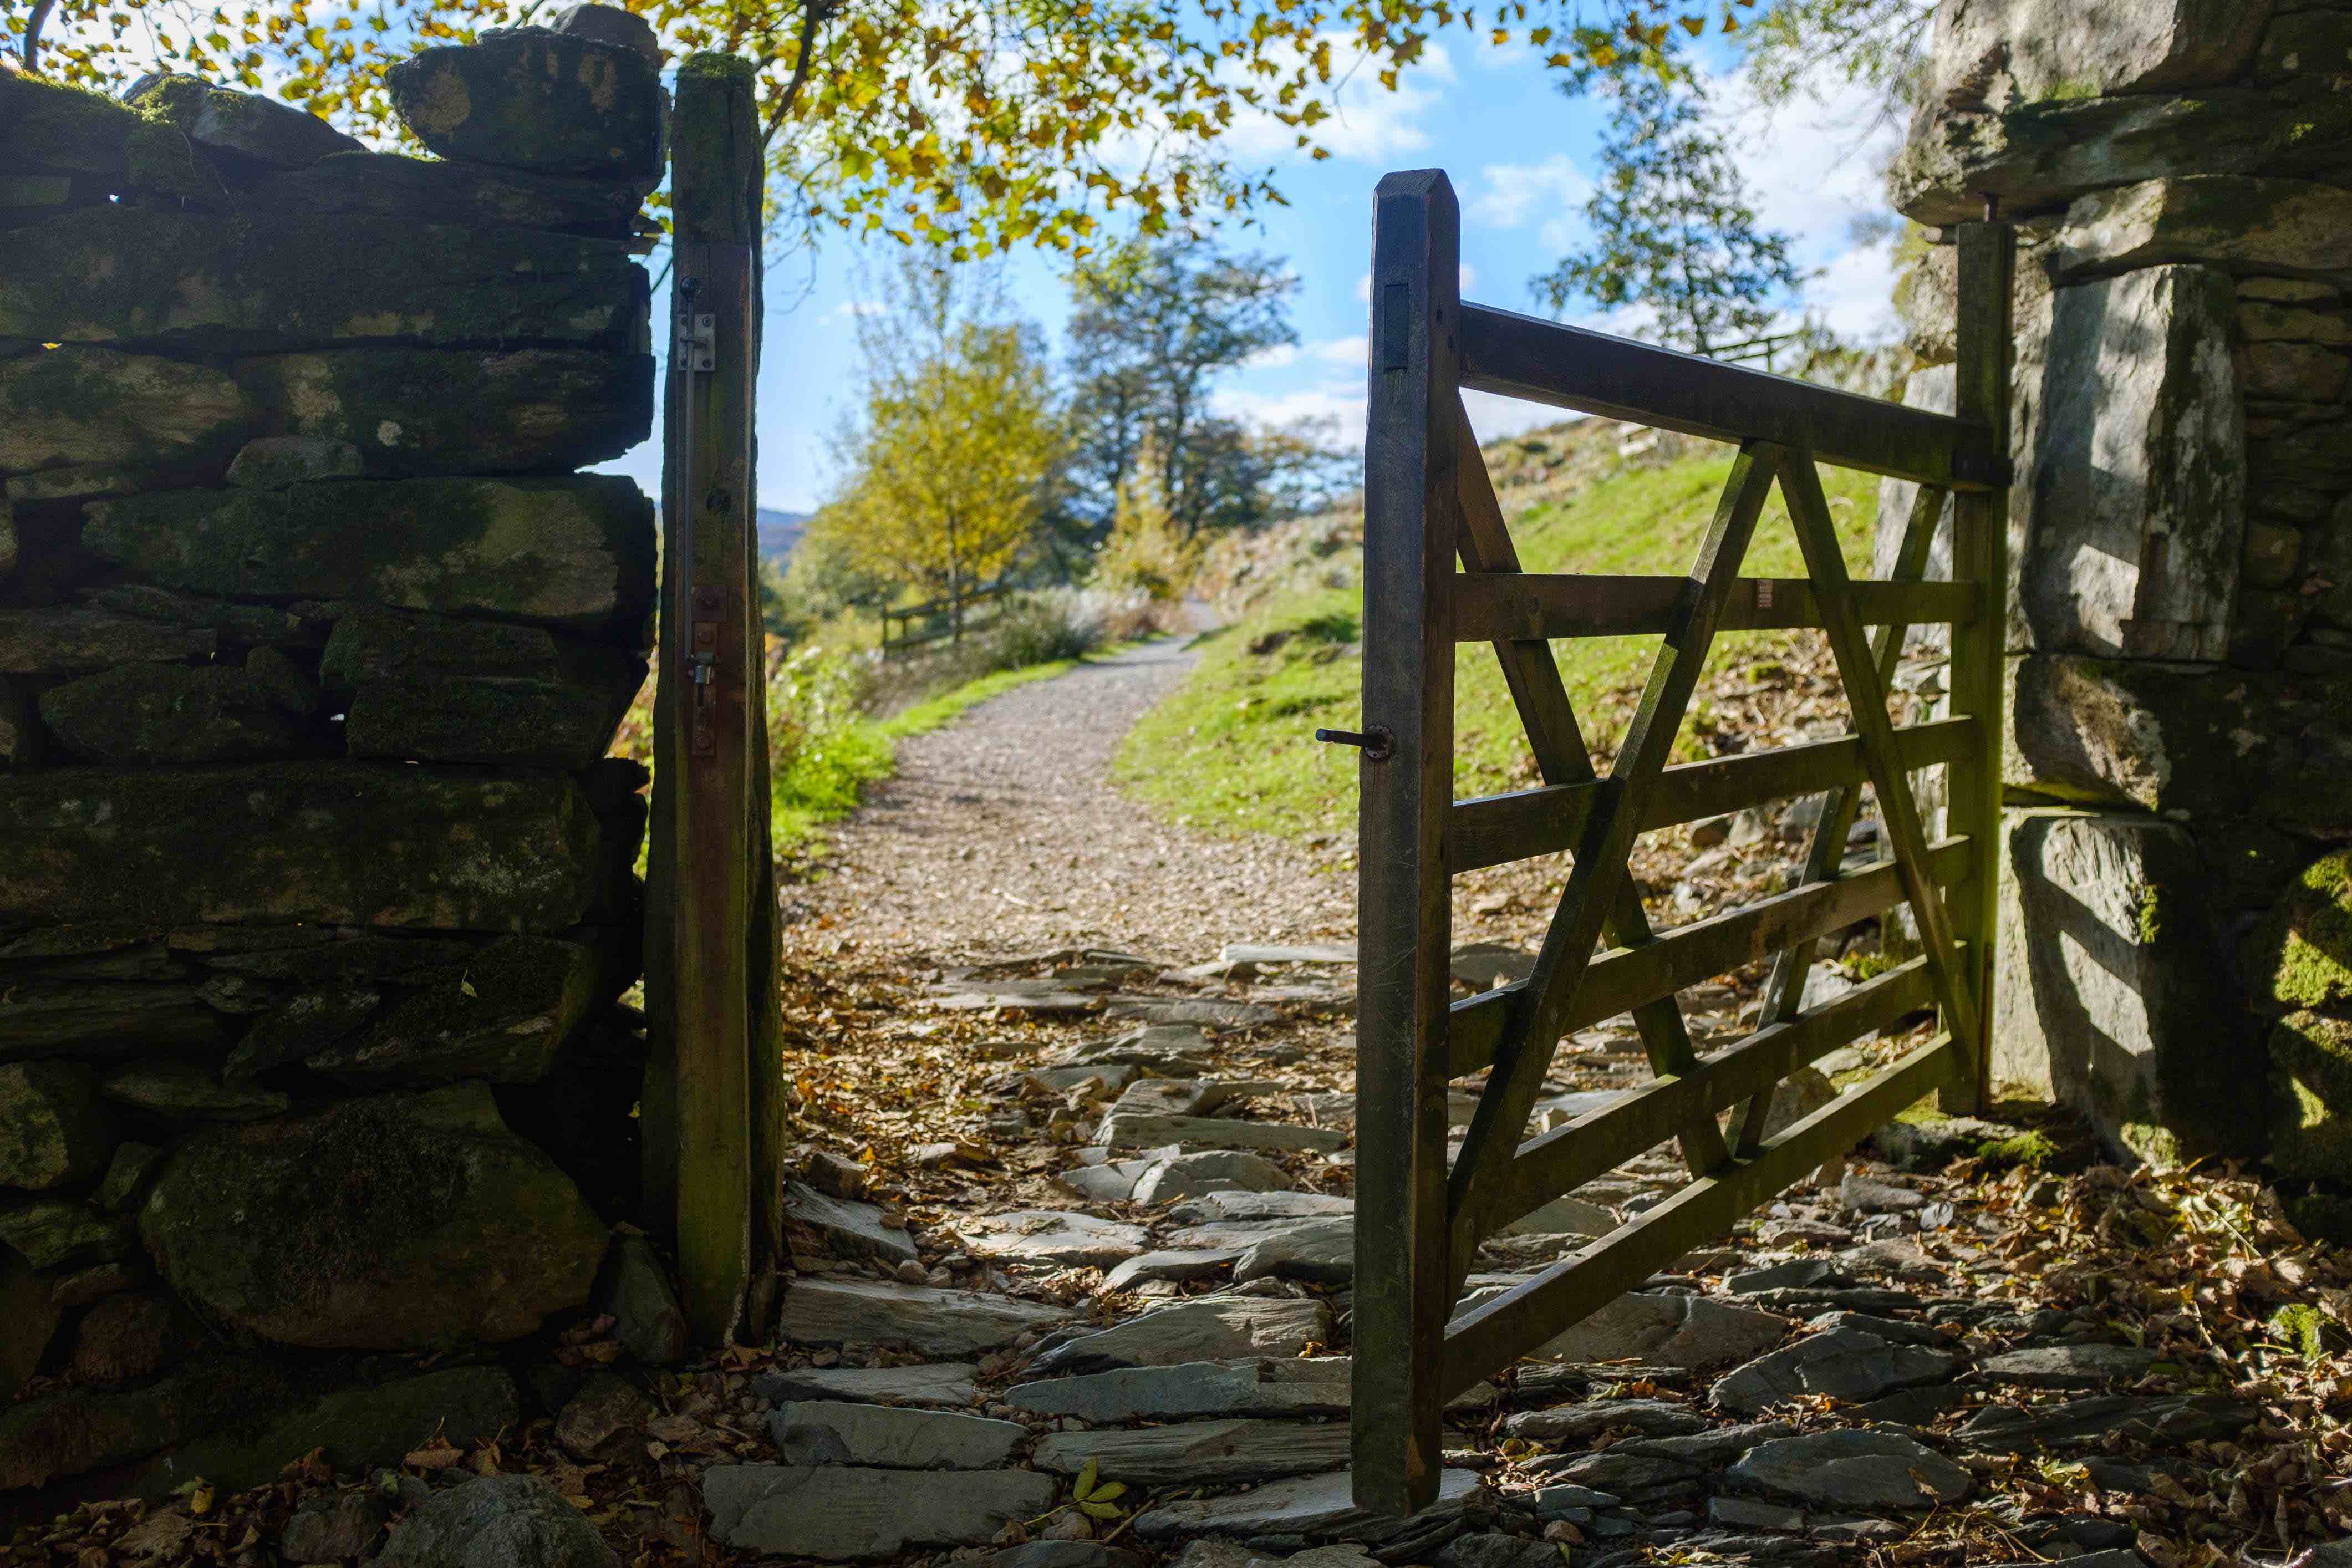 an open wooden gate connecting a dry stone wall with greenery in the background